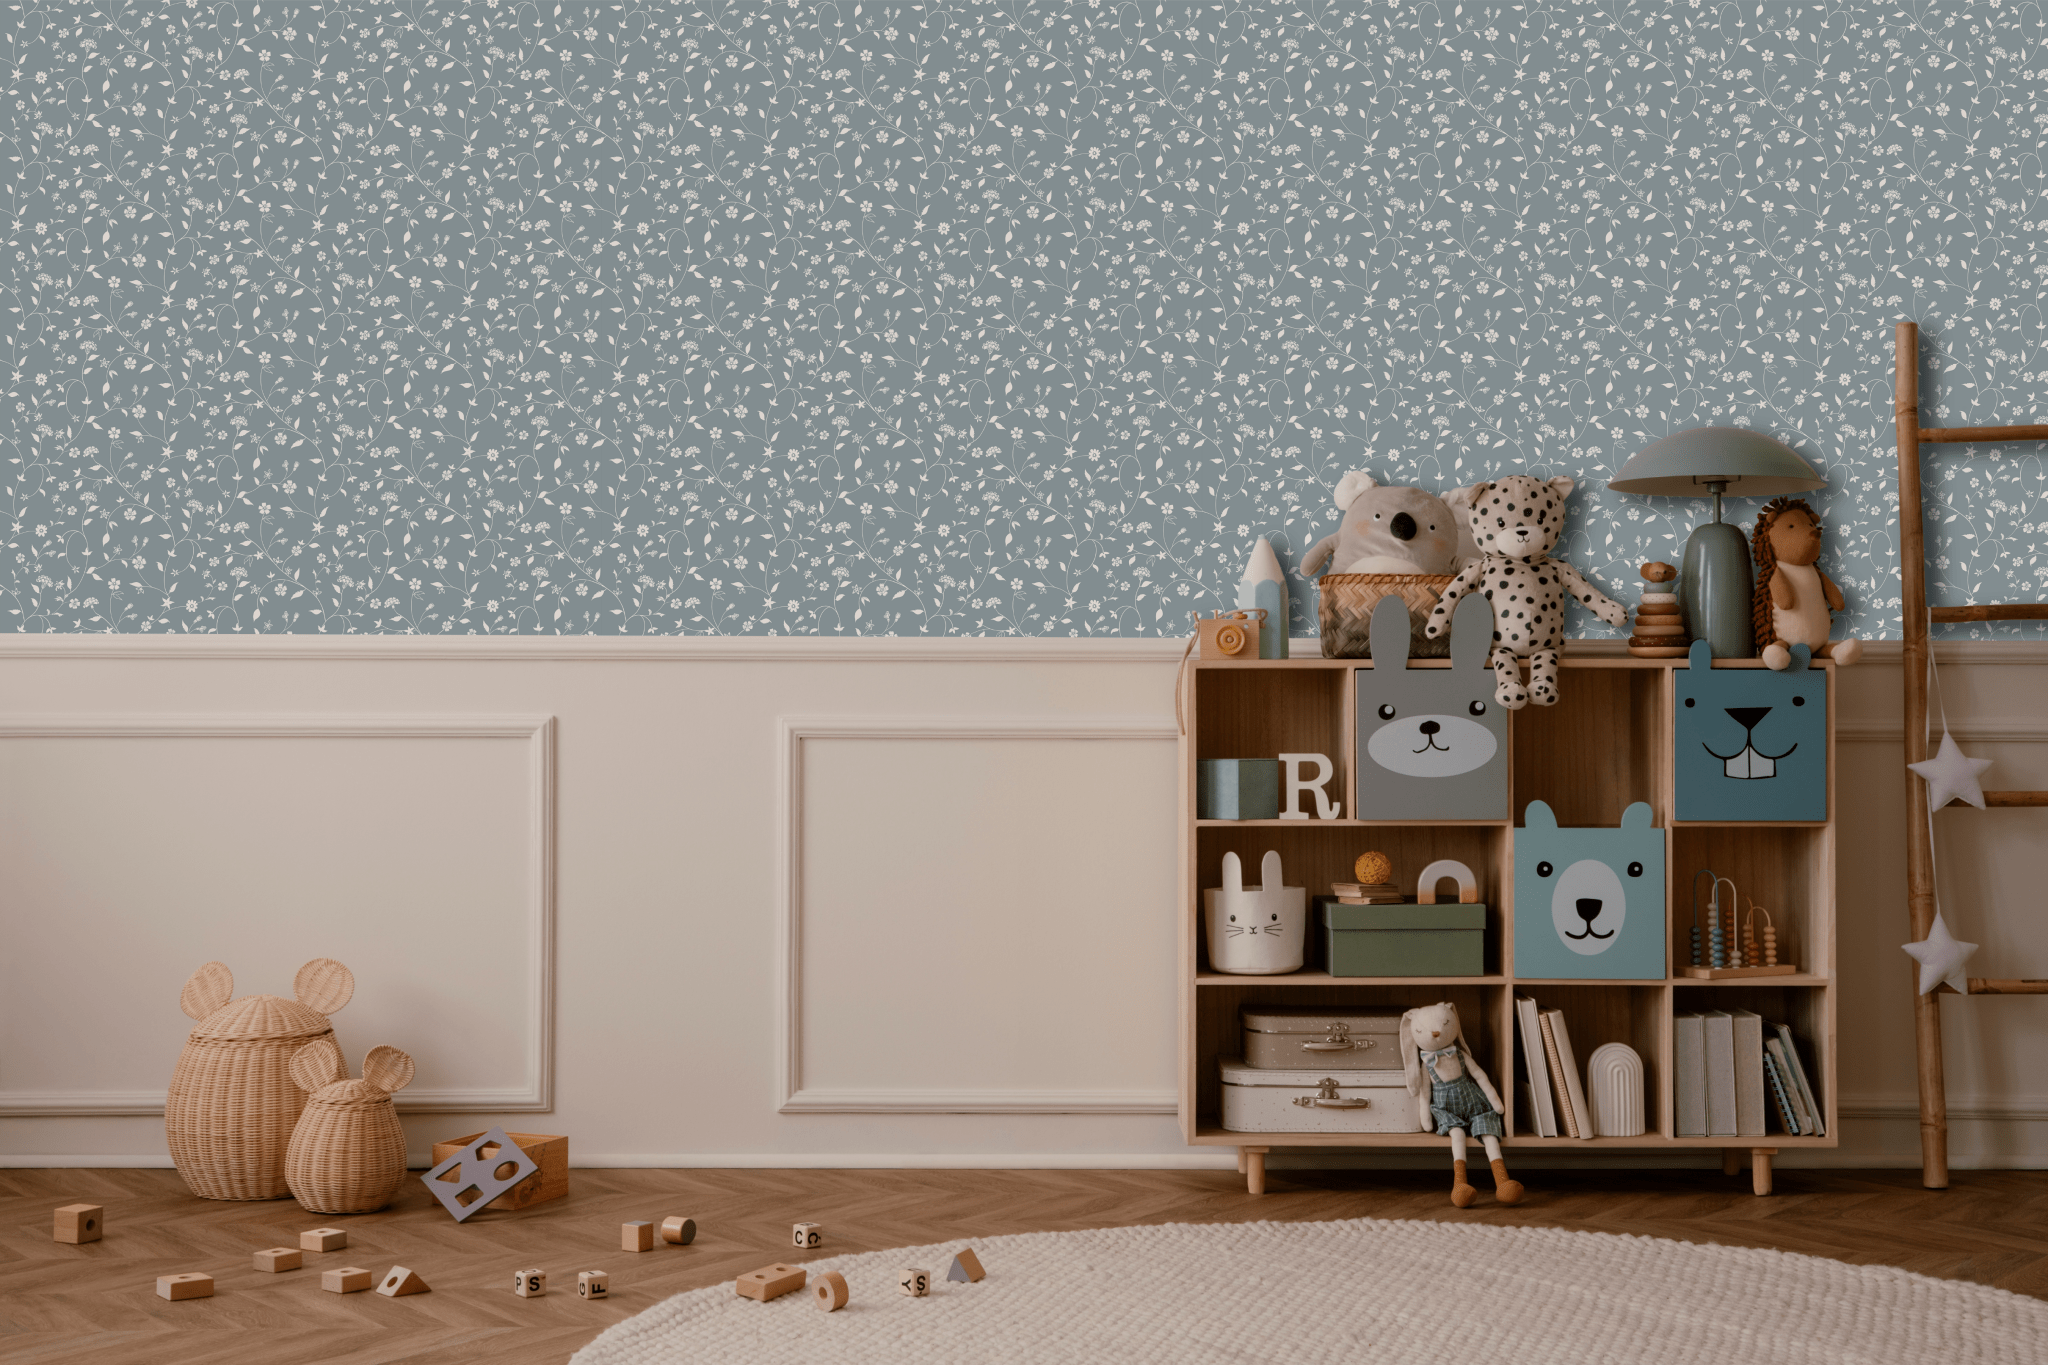 A charming boy's room with blue vine patterned removable wallpaper. A wooden toy shelf is filled with cute animal figures, plush toys, and books. A woven basket and scattered blocks on the floor add a playful touch